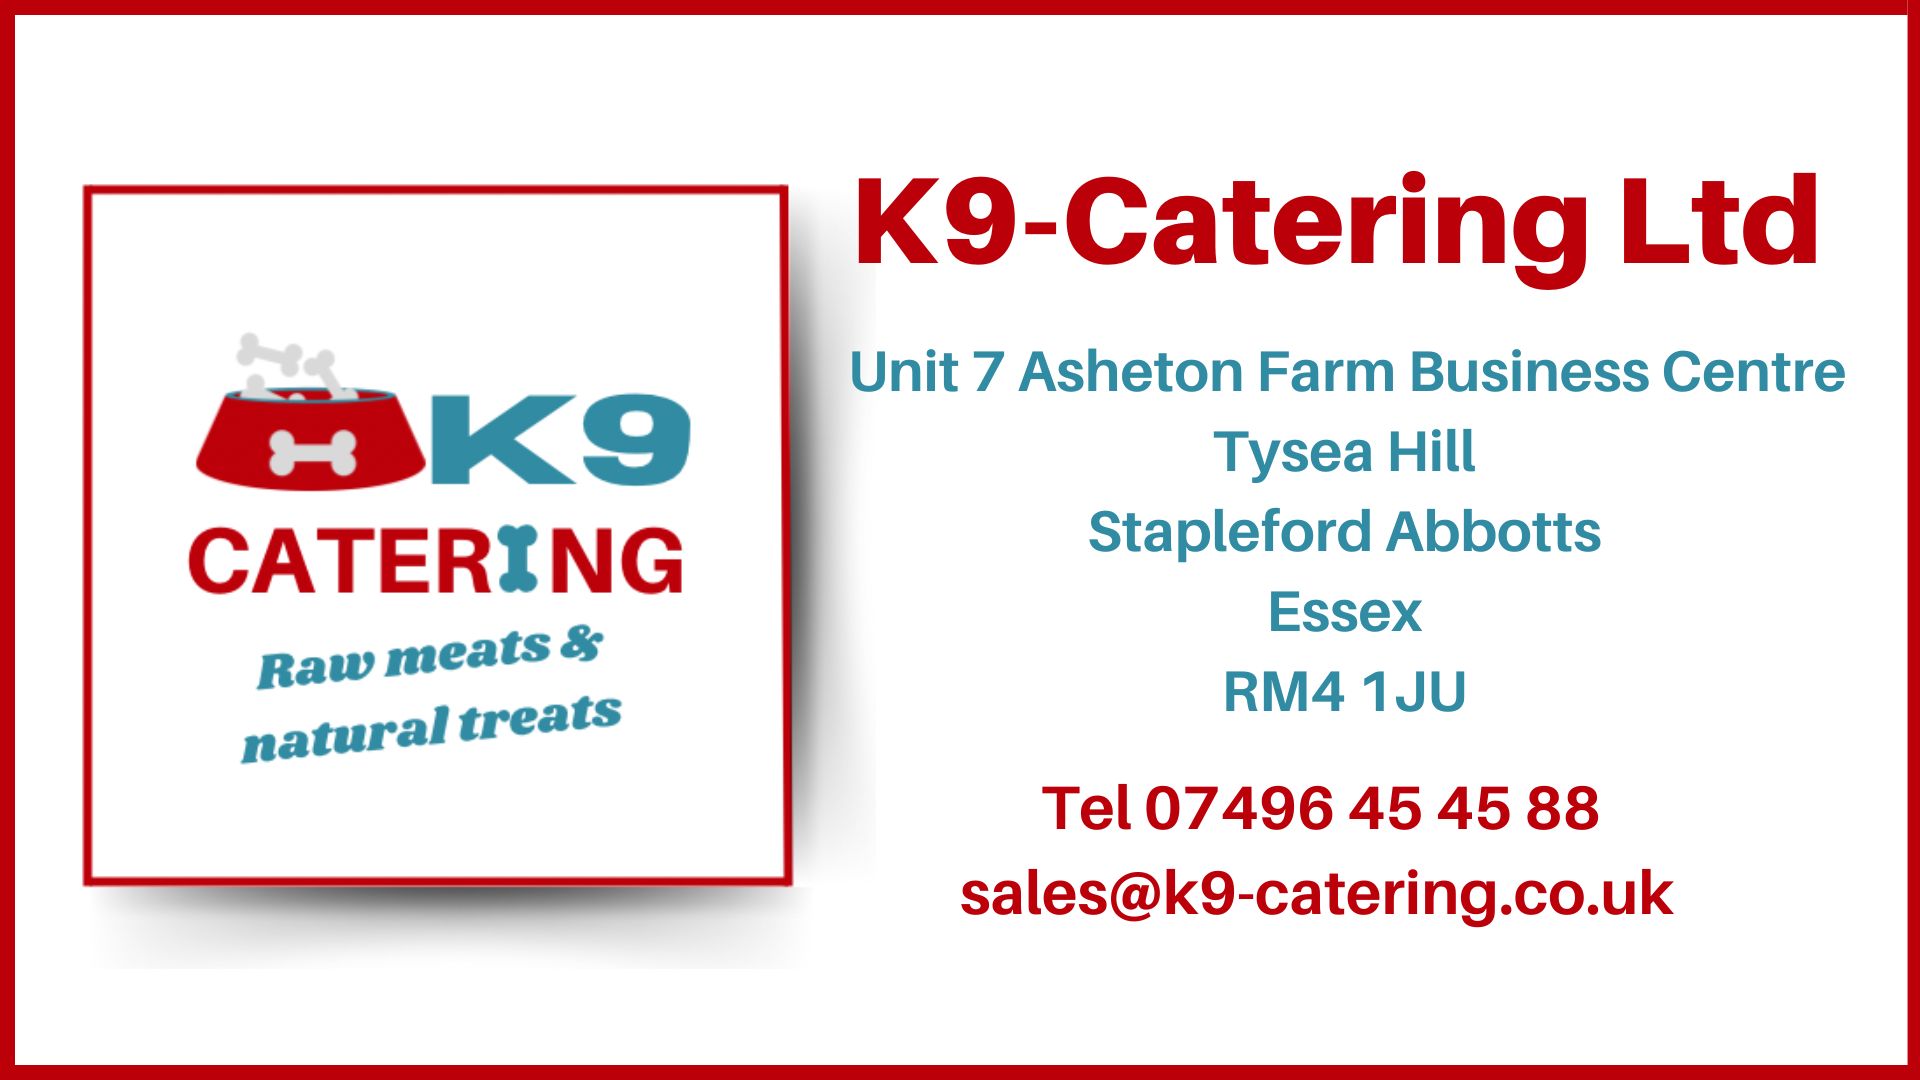 K9-Catering Logo #3 With Contact Details